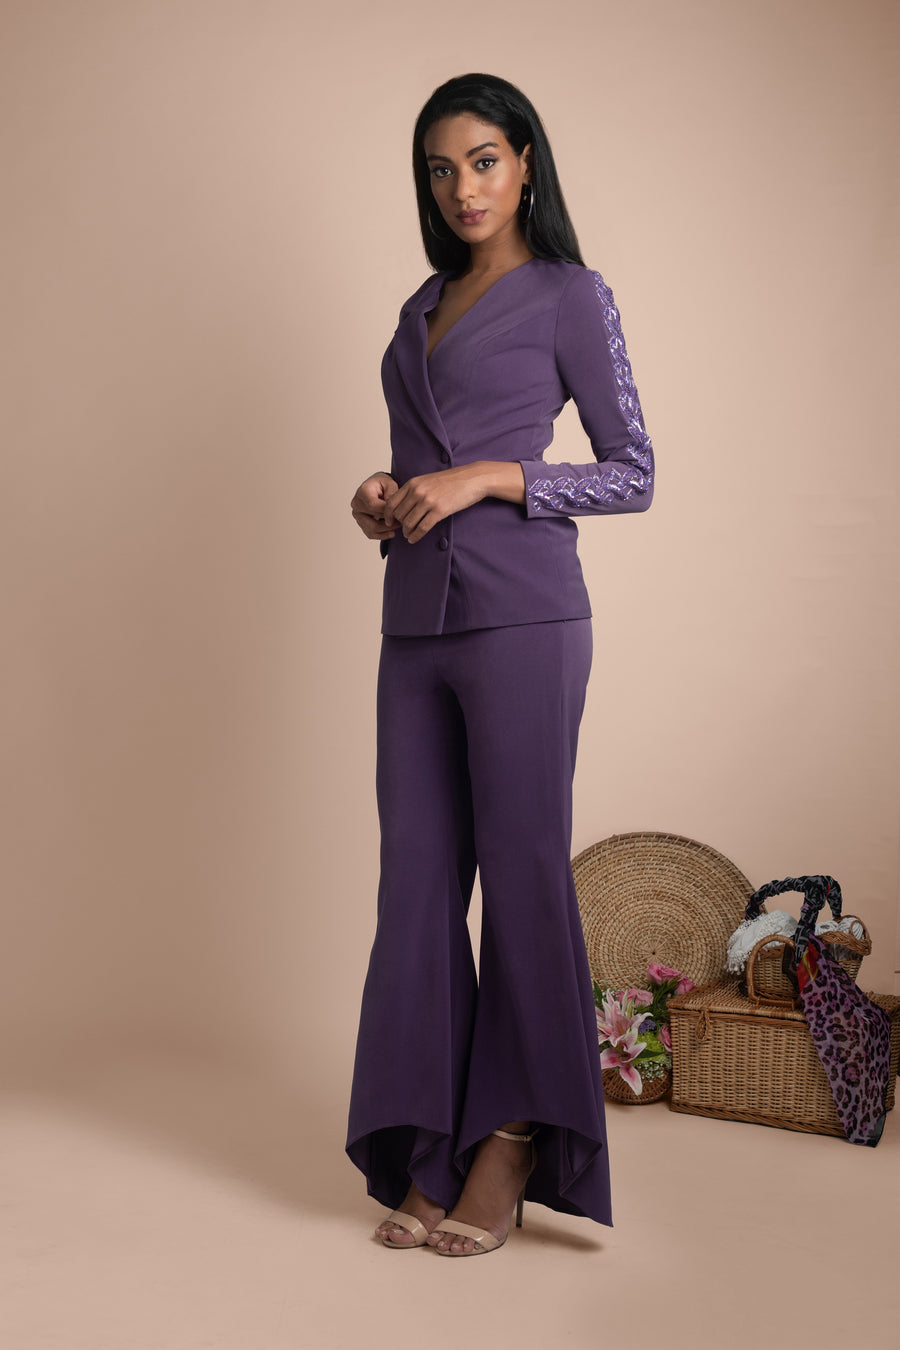 Pantsuit | Stylish formal and party wear.